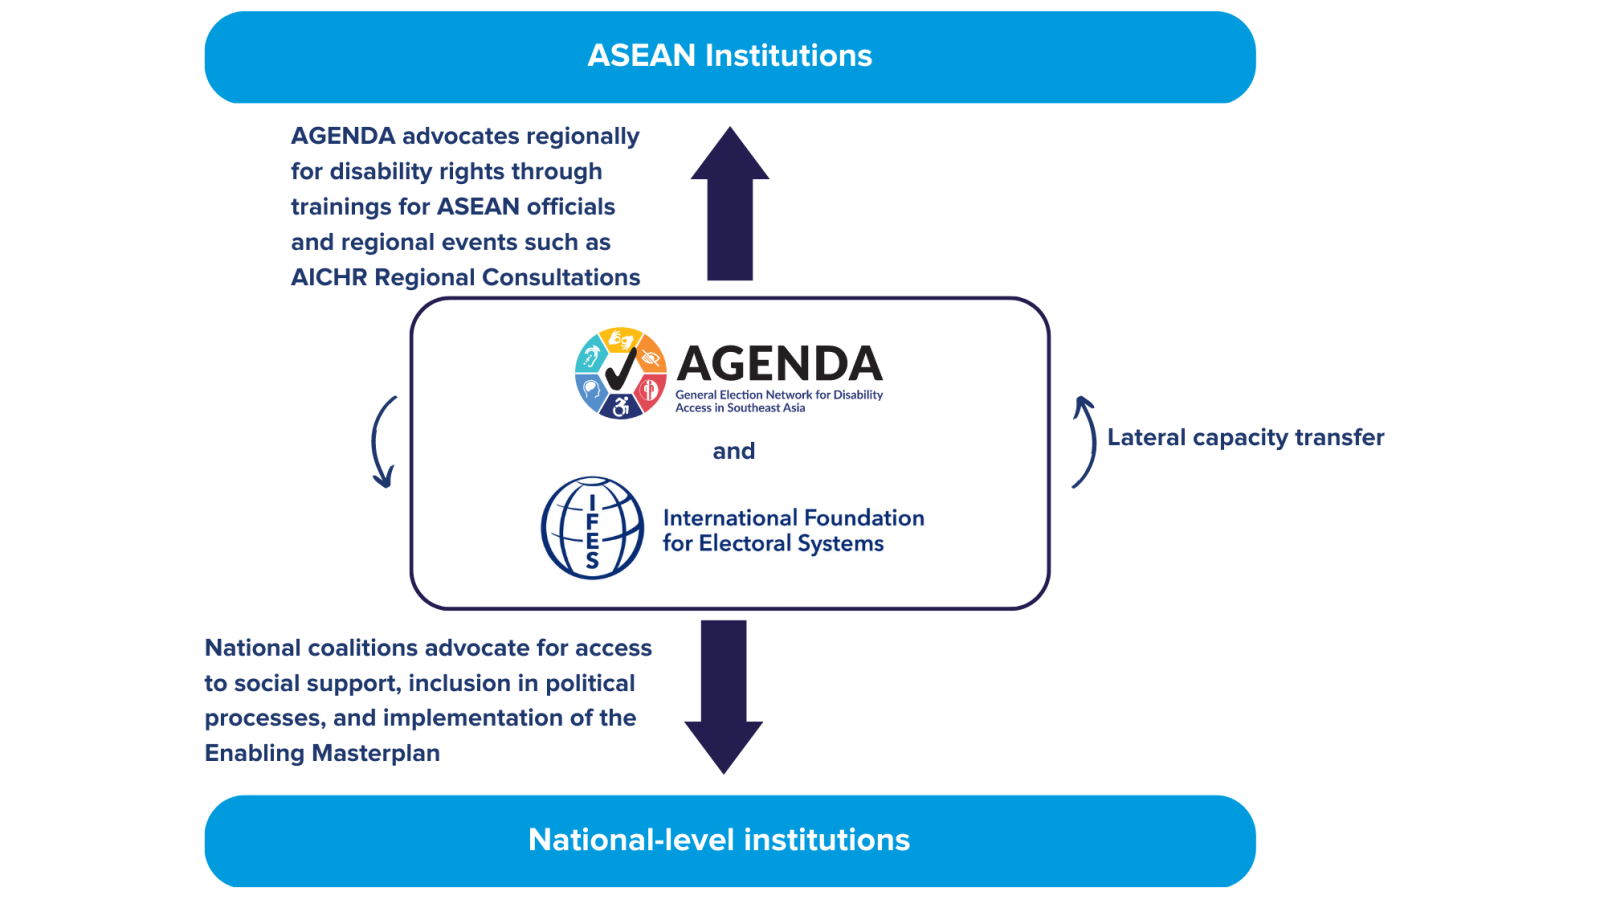 National coalitions advocate for access to social support, inclusion in political processes, and implementation of the Enabling Masterplan National-level institutions ASEAN Institutions AGENDA advocates regionally for disability rights through trainings for ASEAN officials and regional events such as AICHR Regional Consultations Lateral capacity transfer 